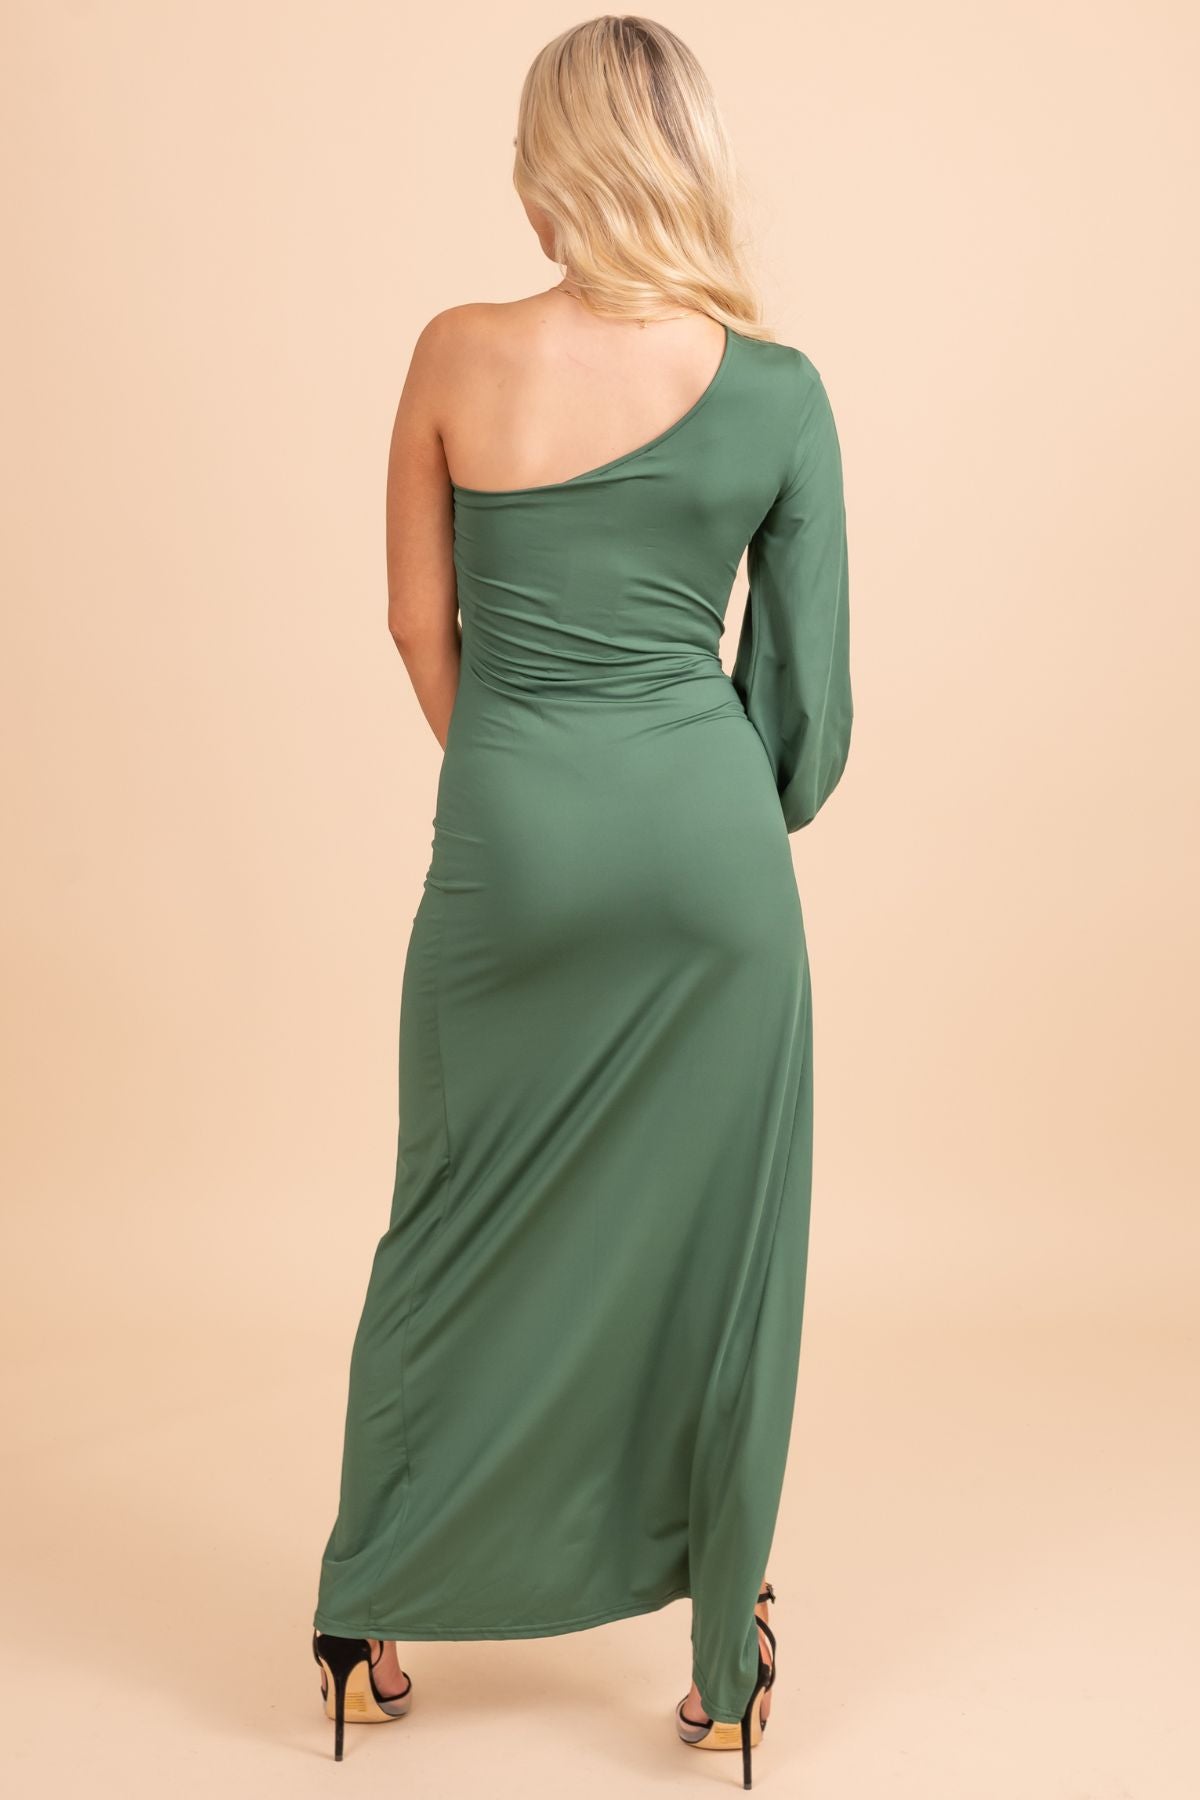 J225055-One Shoulder Matte Jersey Dress with Side Open Flowing Long Sleeves  and Hand Beaded Waist Motif